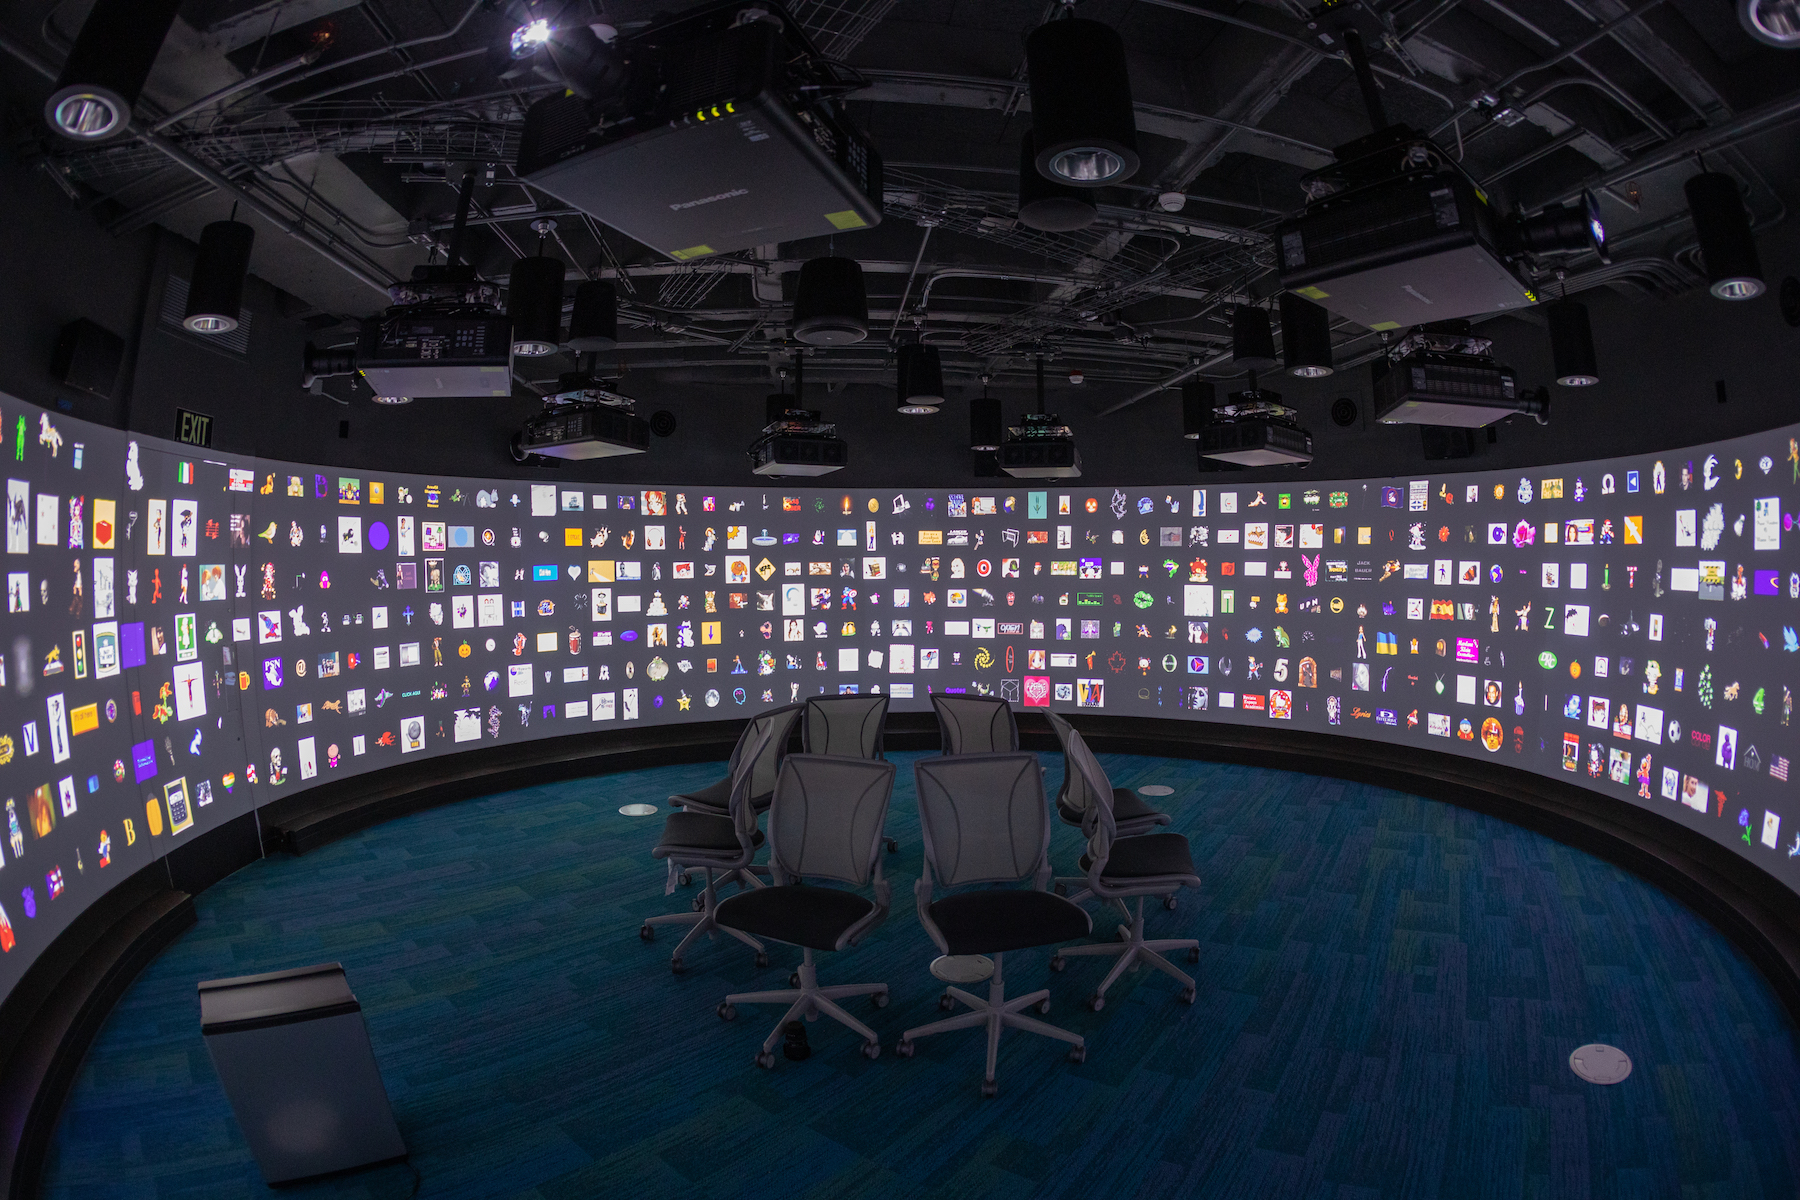 large curved projection screen displaying multiple squares with a variety of shapes and colors. 6 chairs in a circle in the center